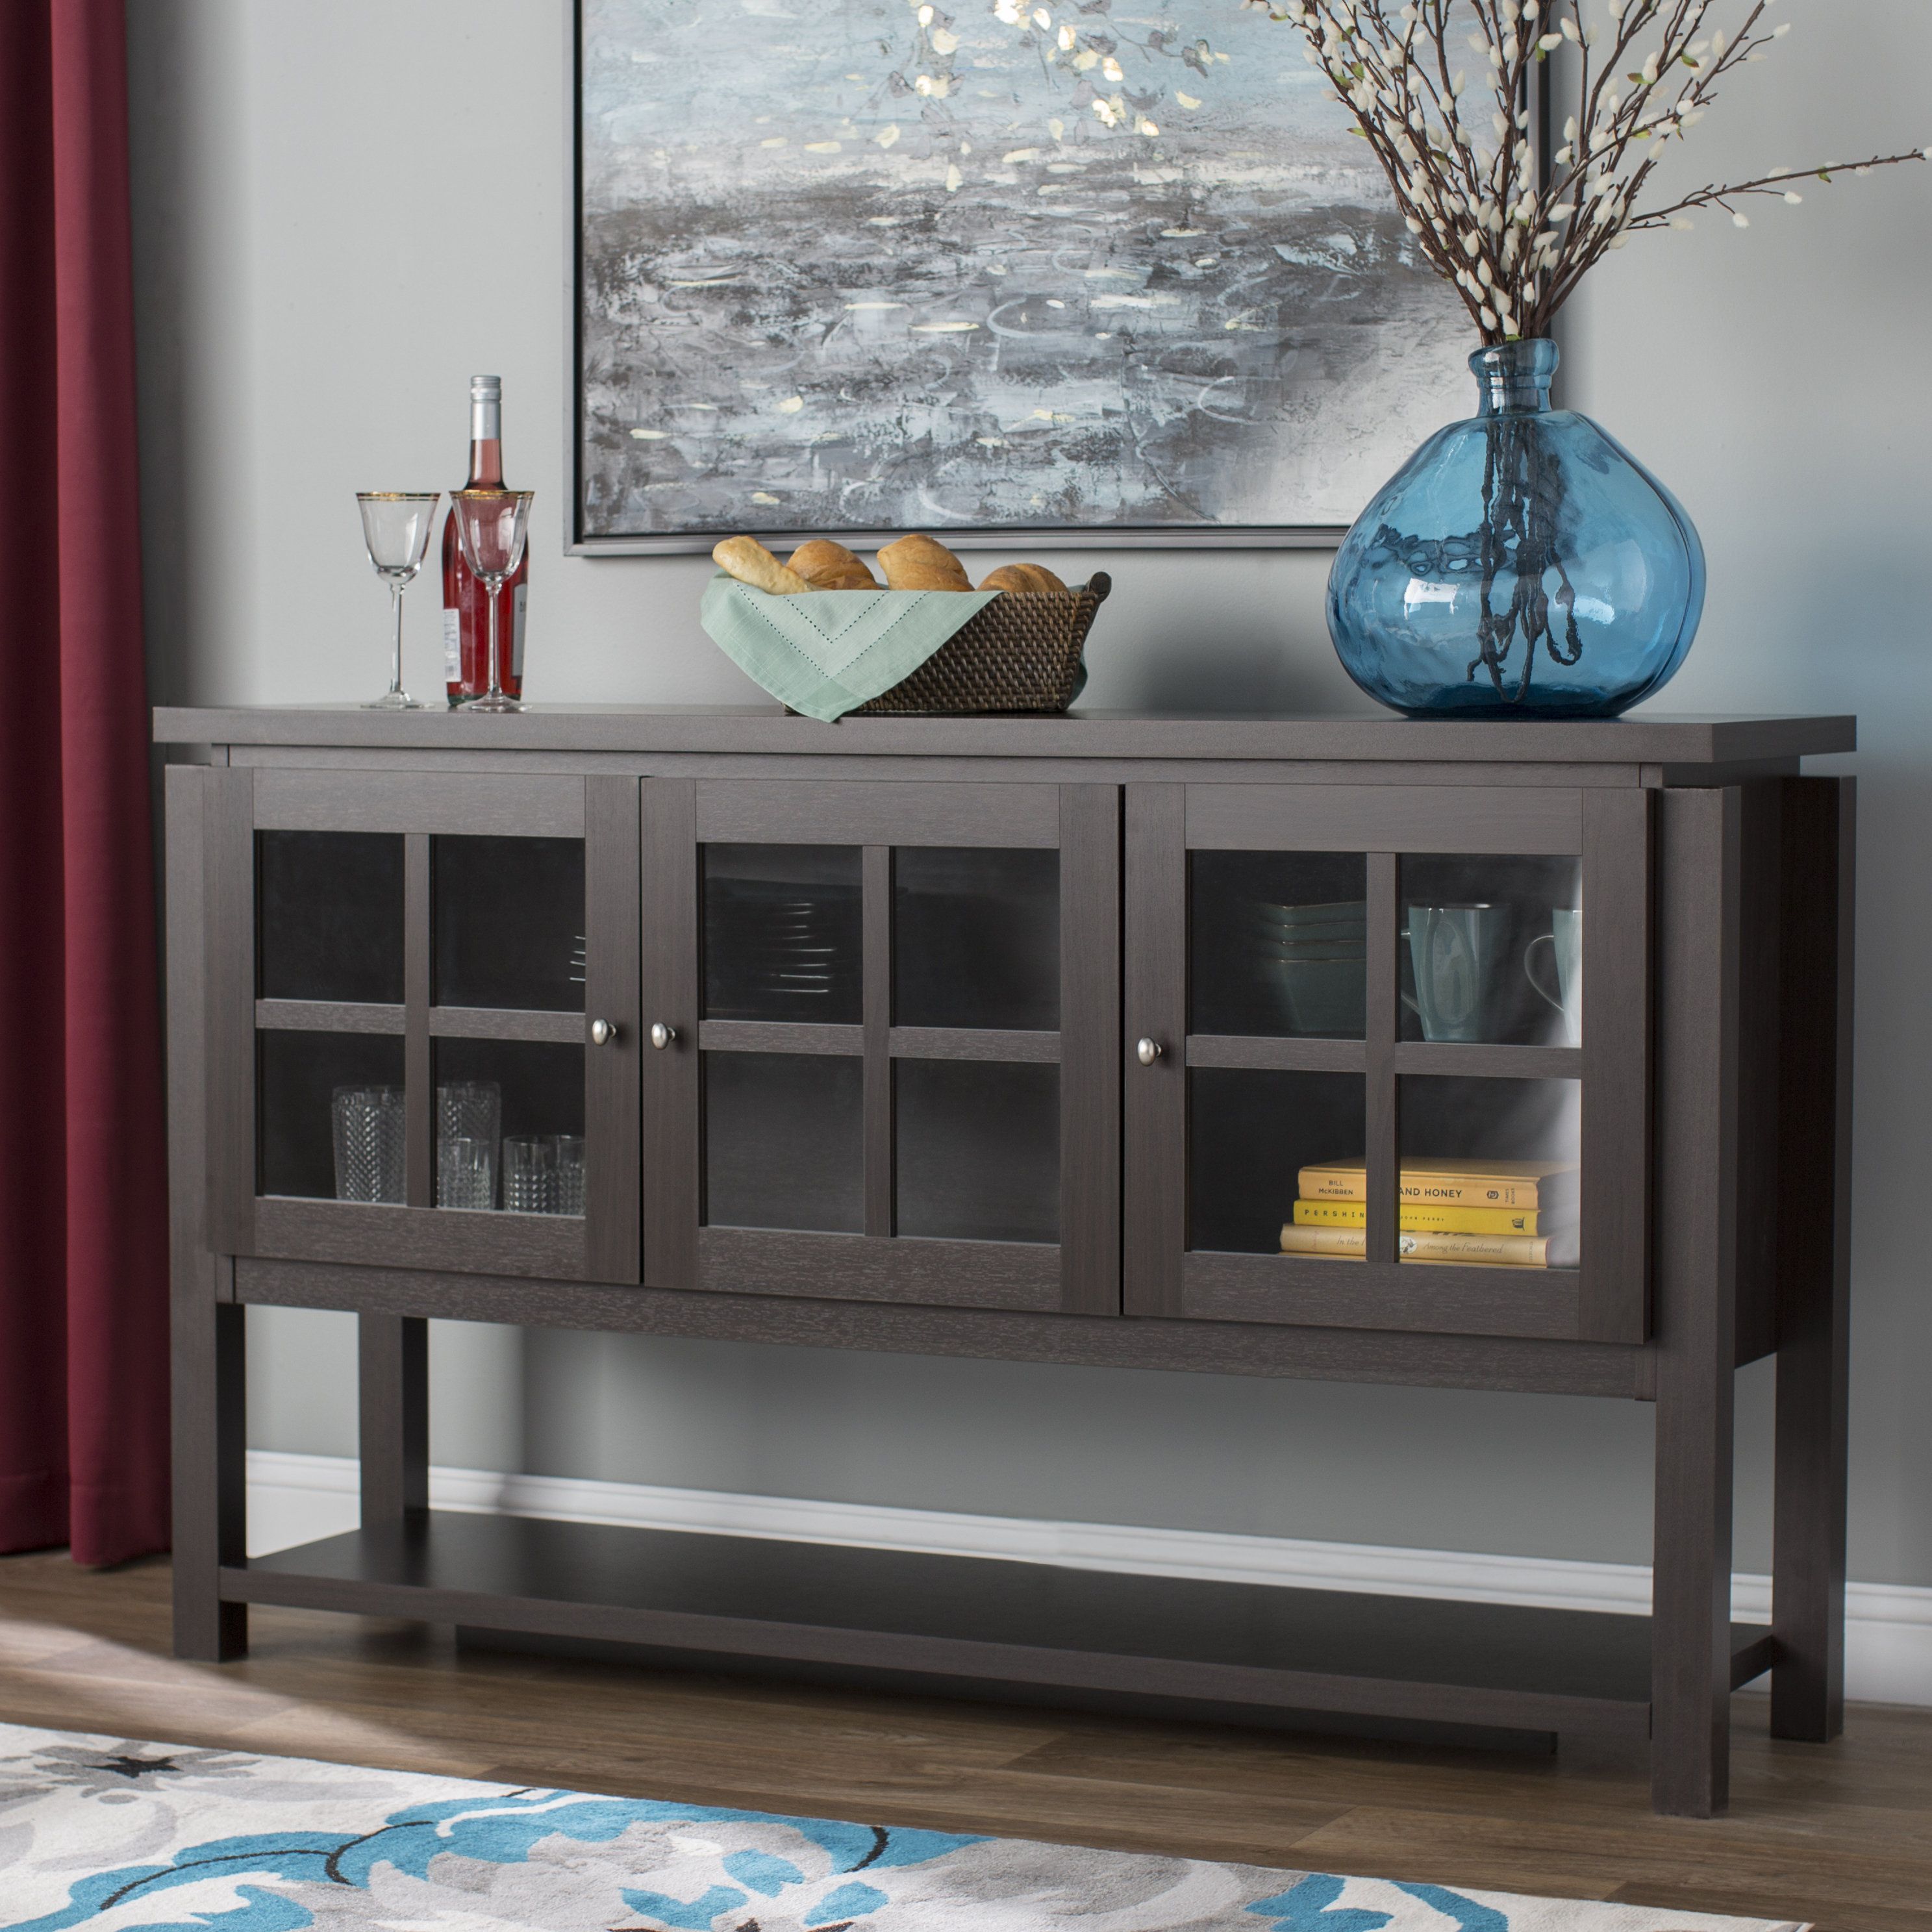 Laurel Foundry Modern Farmhouse Tyndalls Park 59'' Sideboard & Reviews |  Wayfair With Regard To Buffet Tables For Dining Room (View 8 of 15)